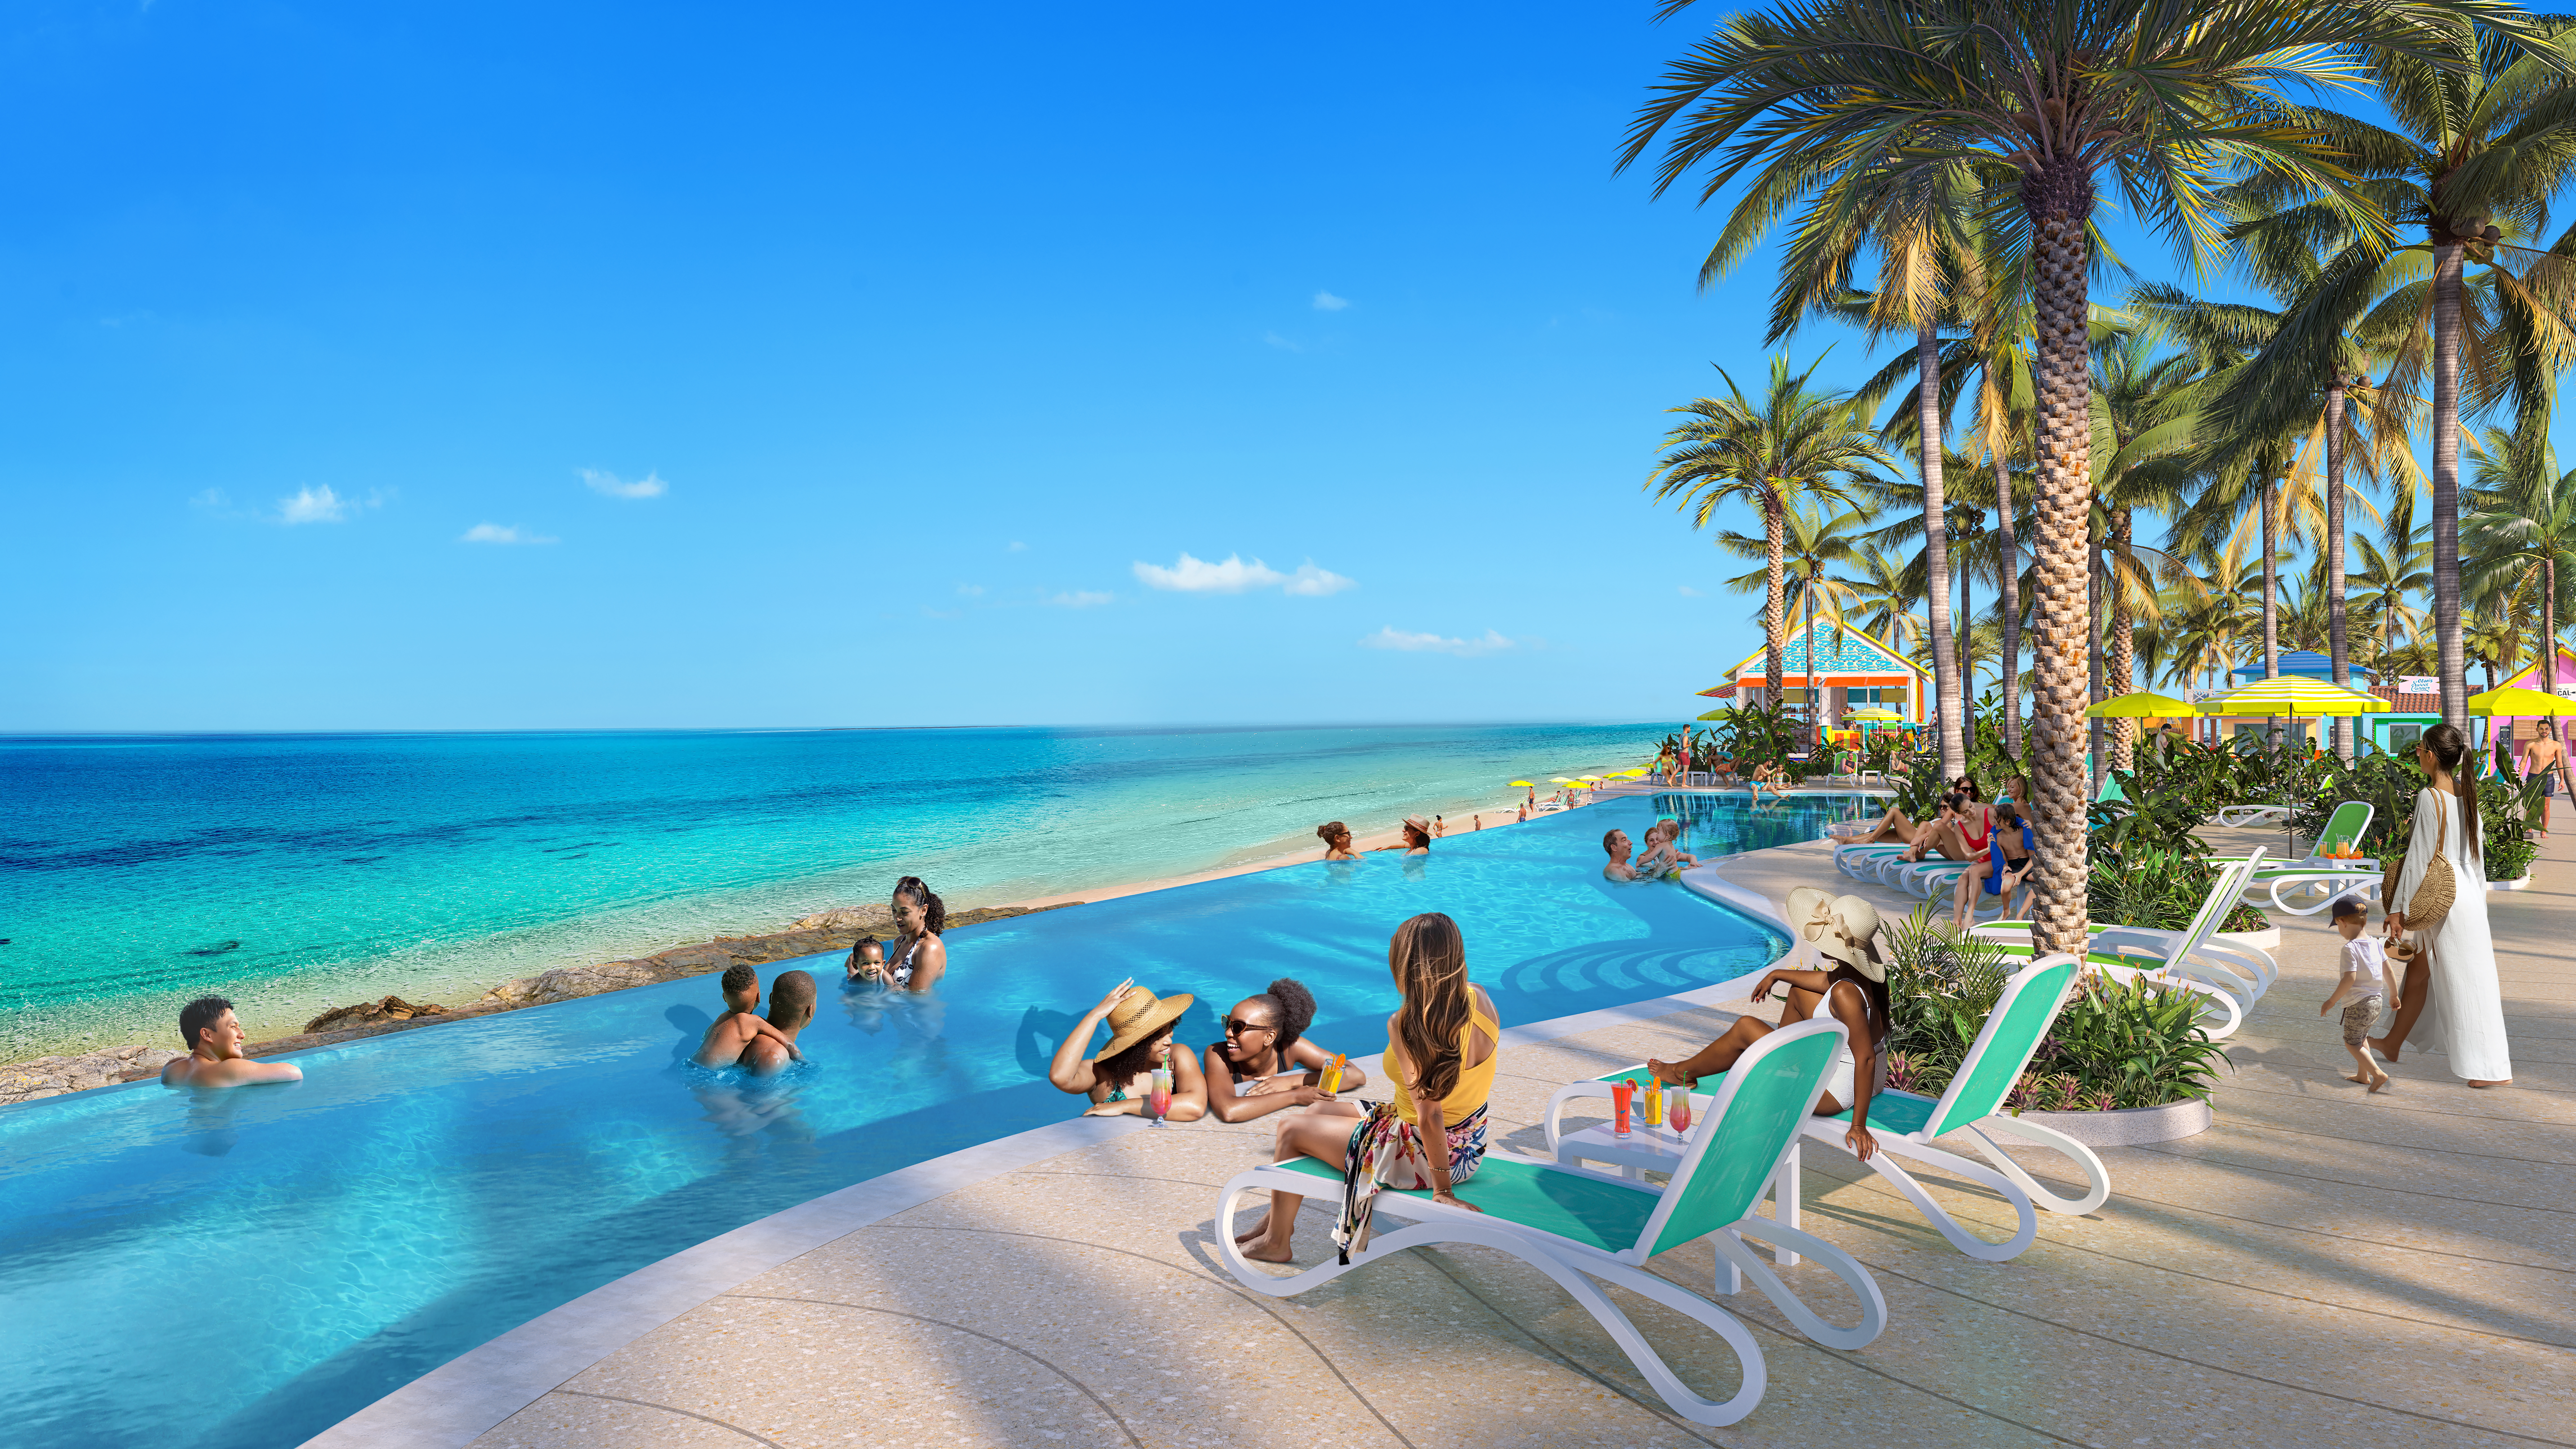 Construction Begins On Royal Caribbean’s First Royal Beach Club. The New Experience on Paradise Island in The Bahamas Opens in 2025  (Image at LateCruiseNews.com - April 2024)  (Image at LateCruiseNews.com - April 2024)